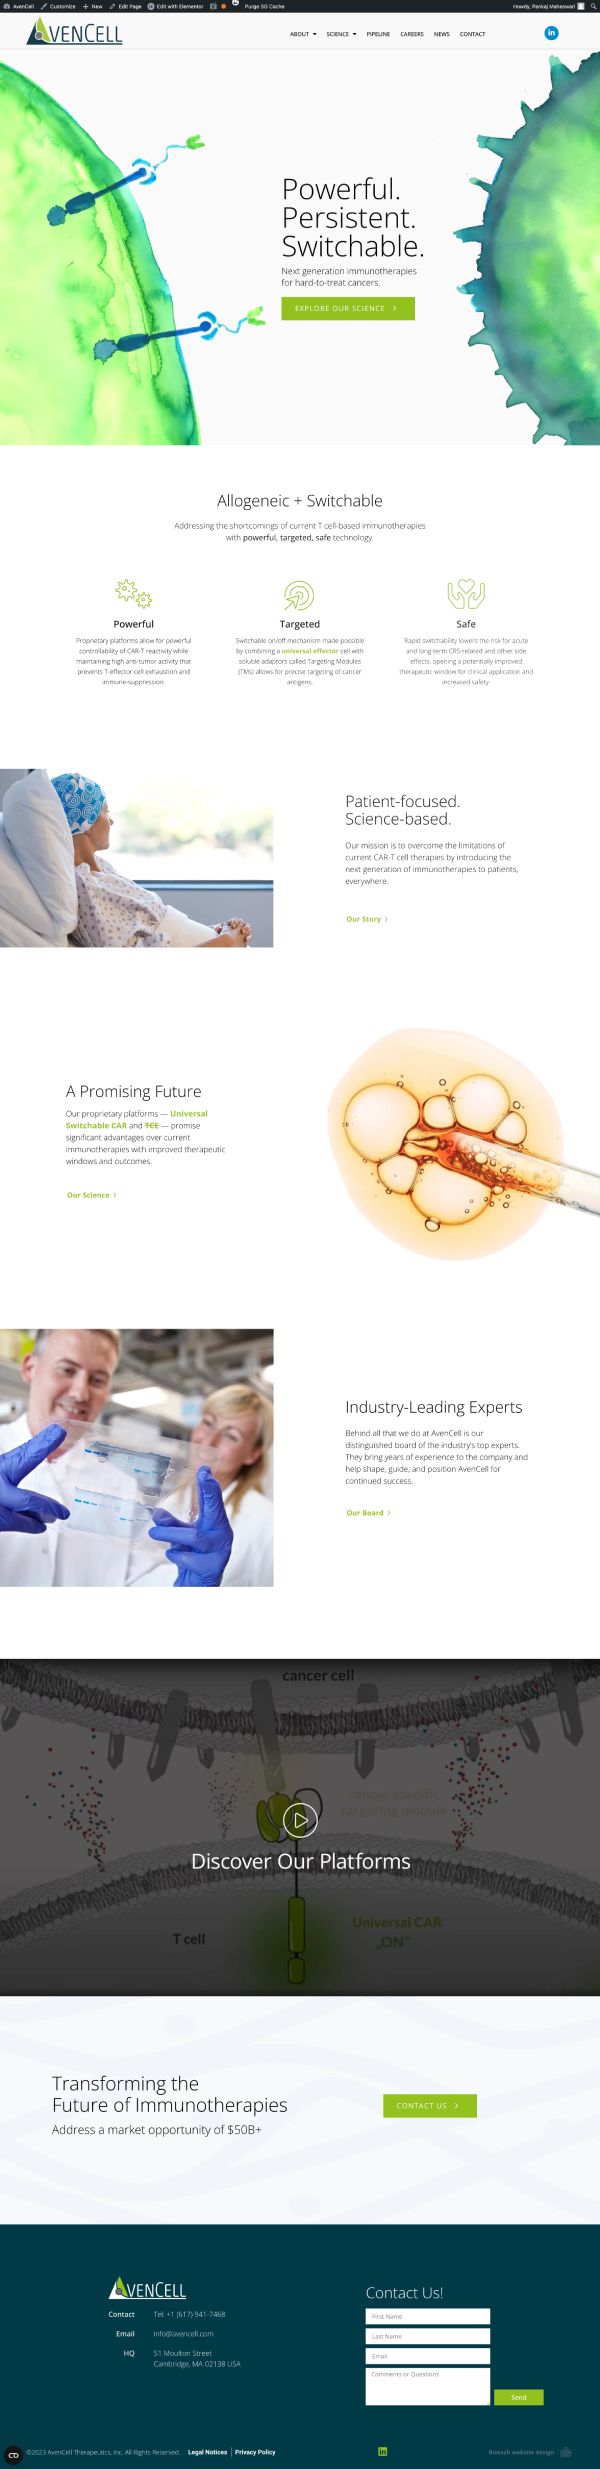 AvenCell-Clinical-Stage-Immunotherapy-Biopharma-WebsiteDesigns-Scroll-example